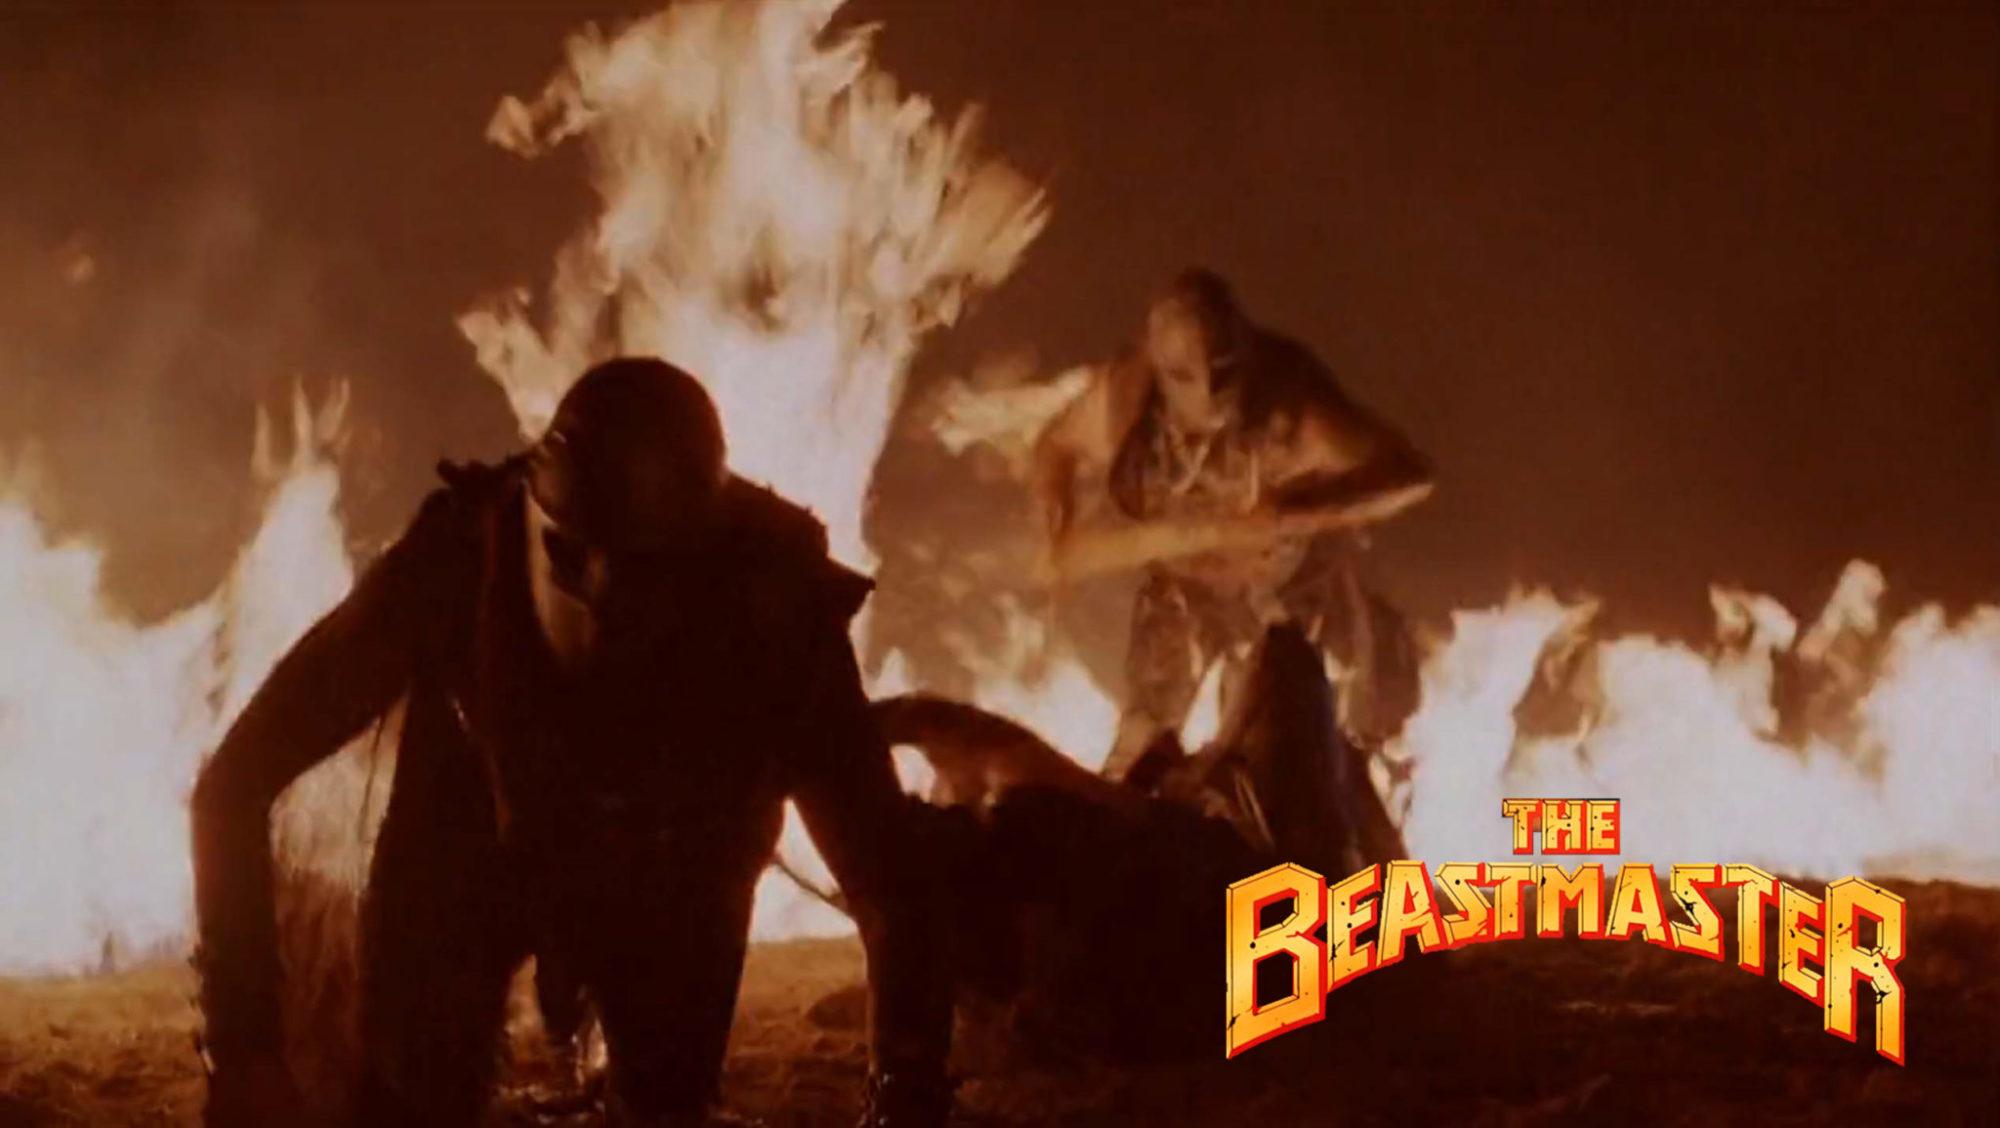 The Beastmaster (1982)